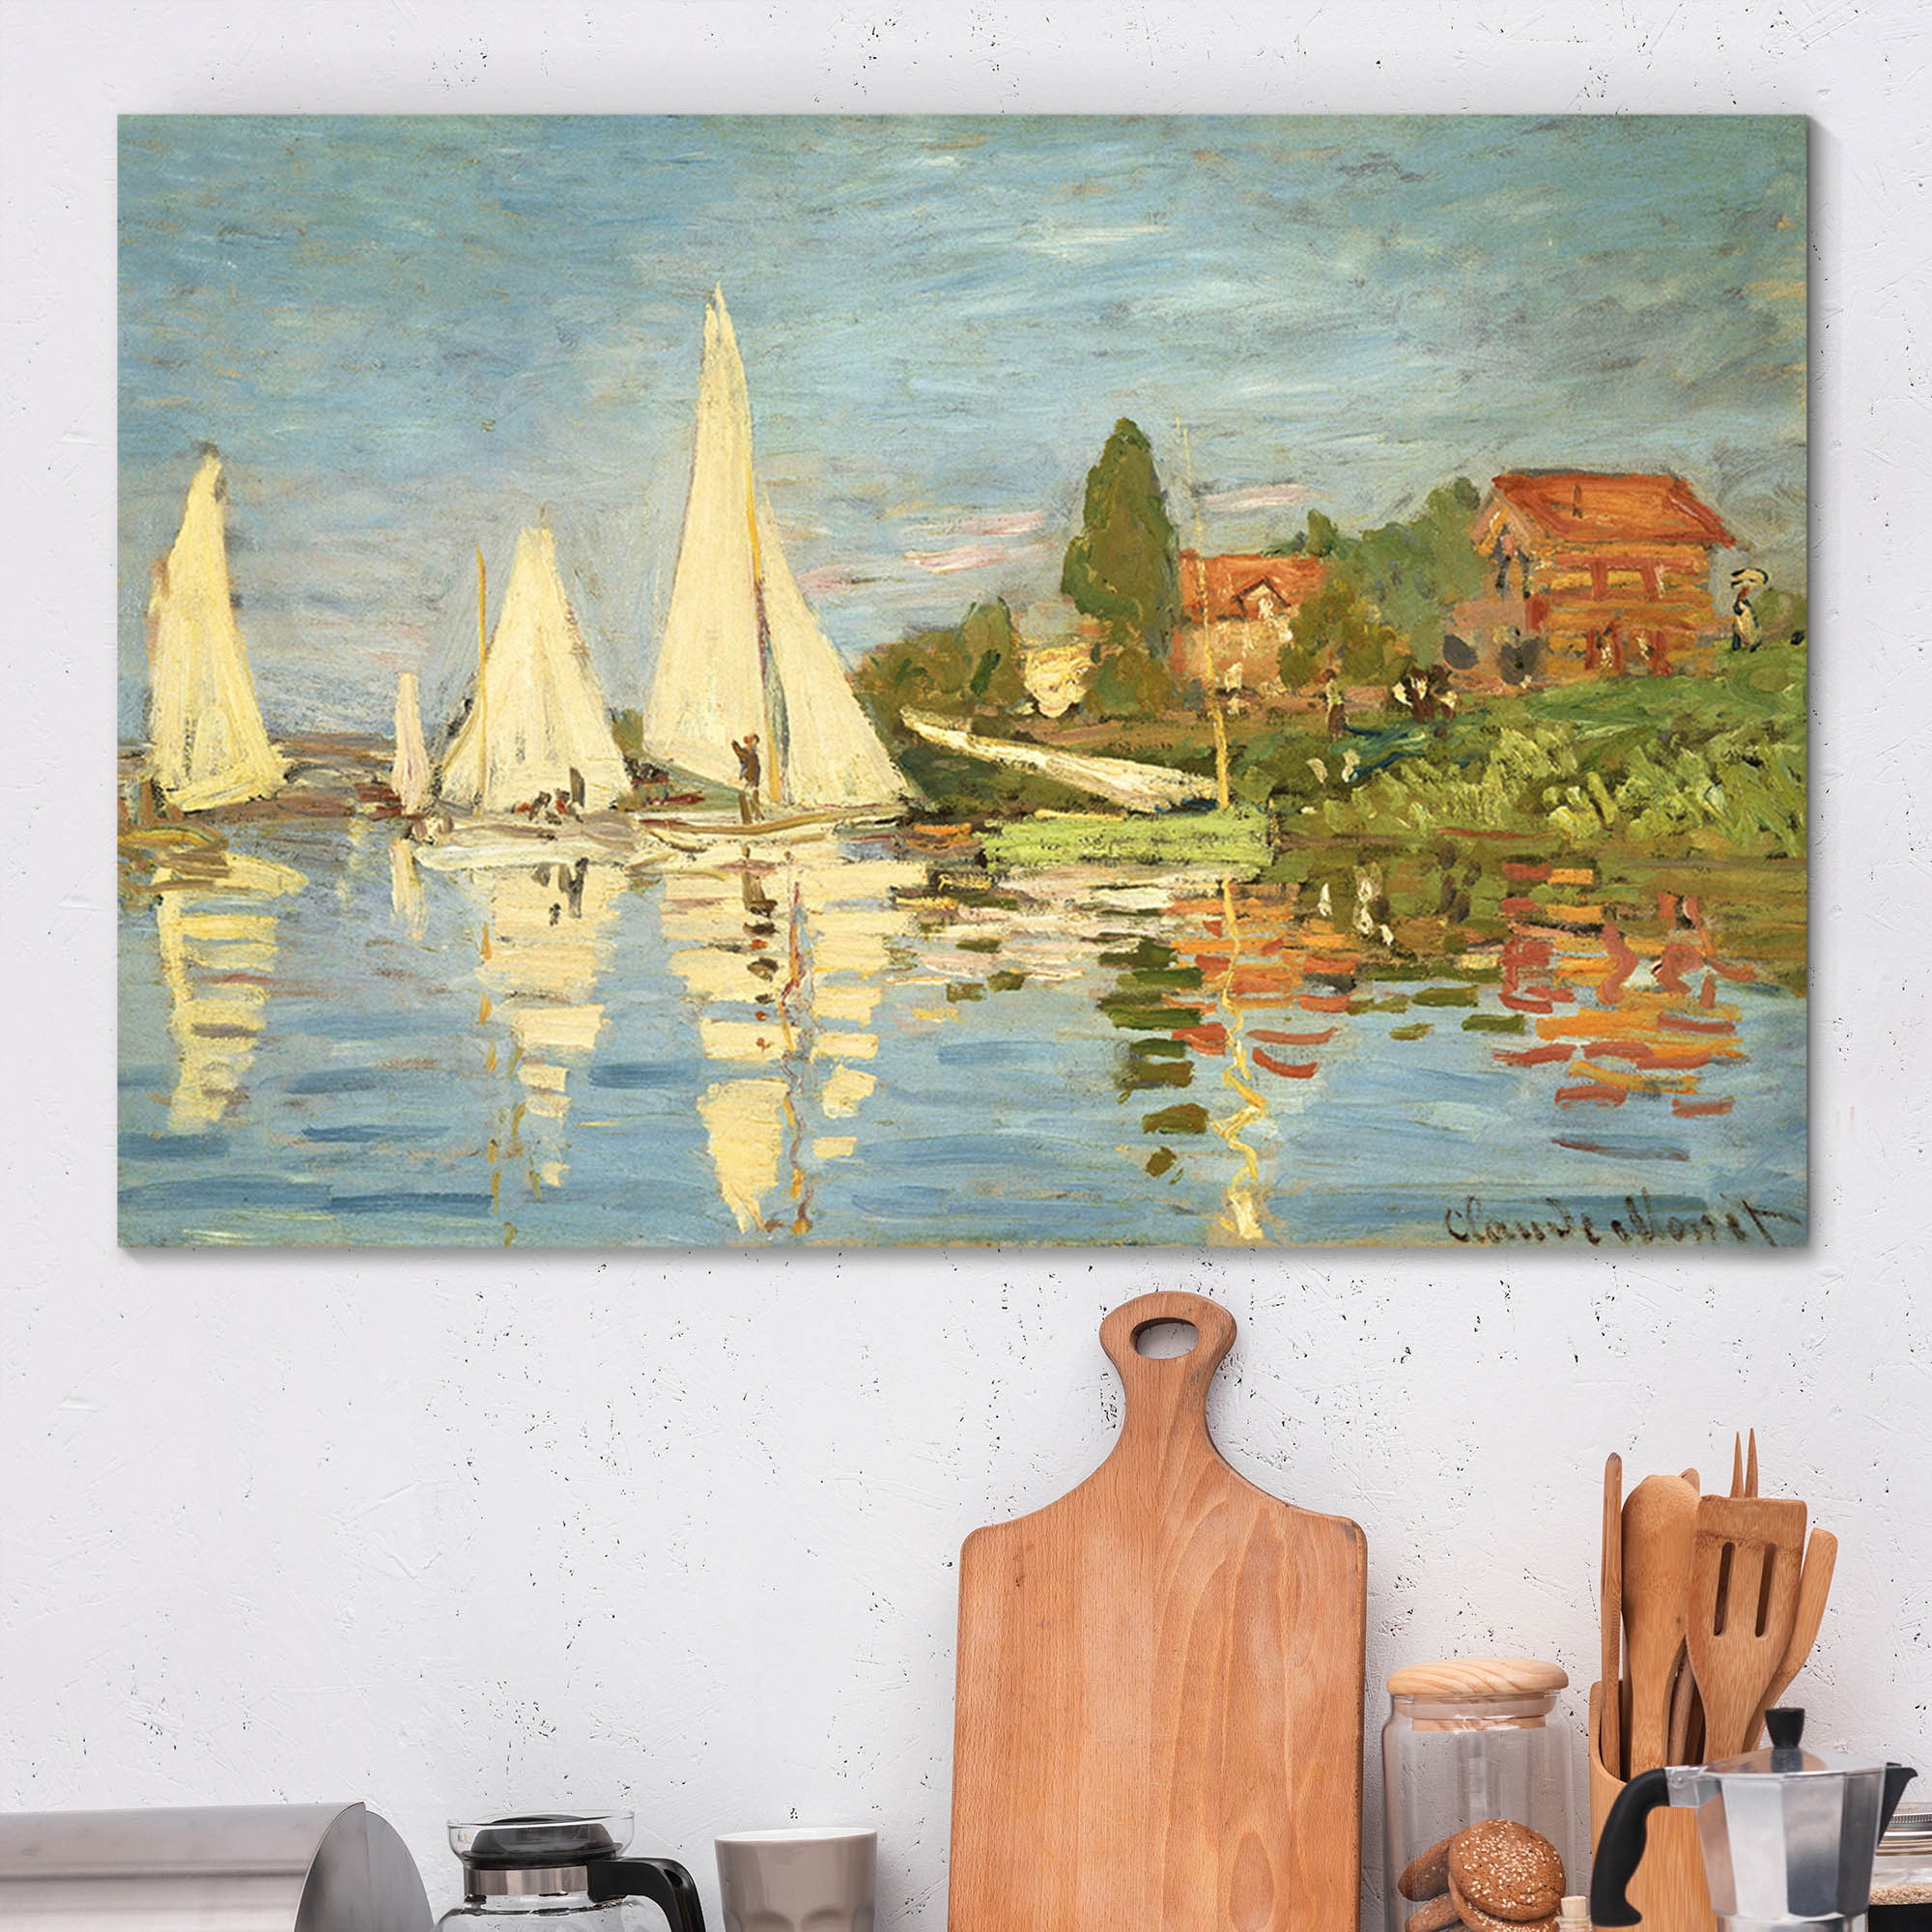 Regatta at Argenteuil in a kitchen showing famous monet paintings